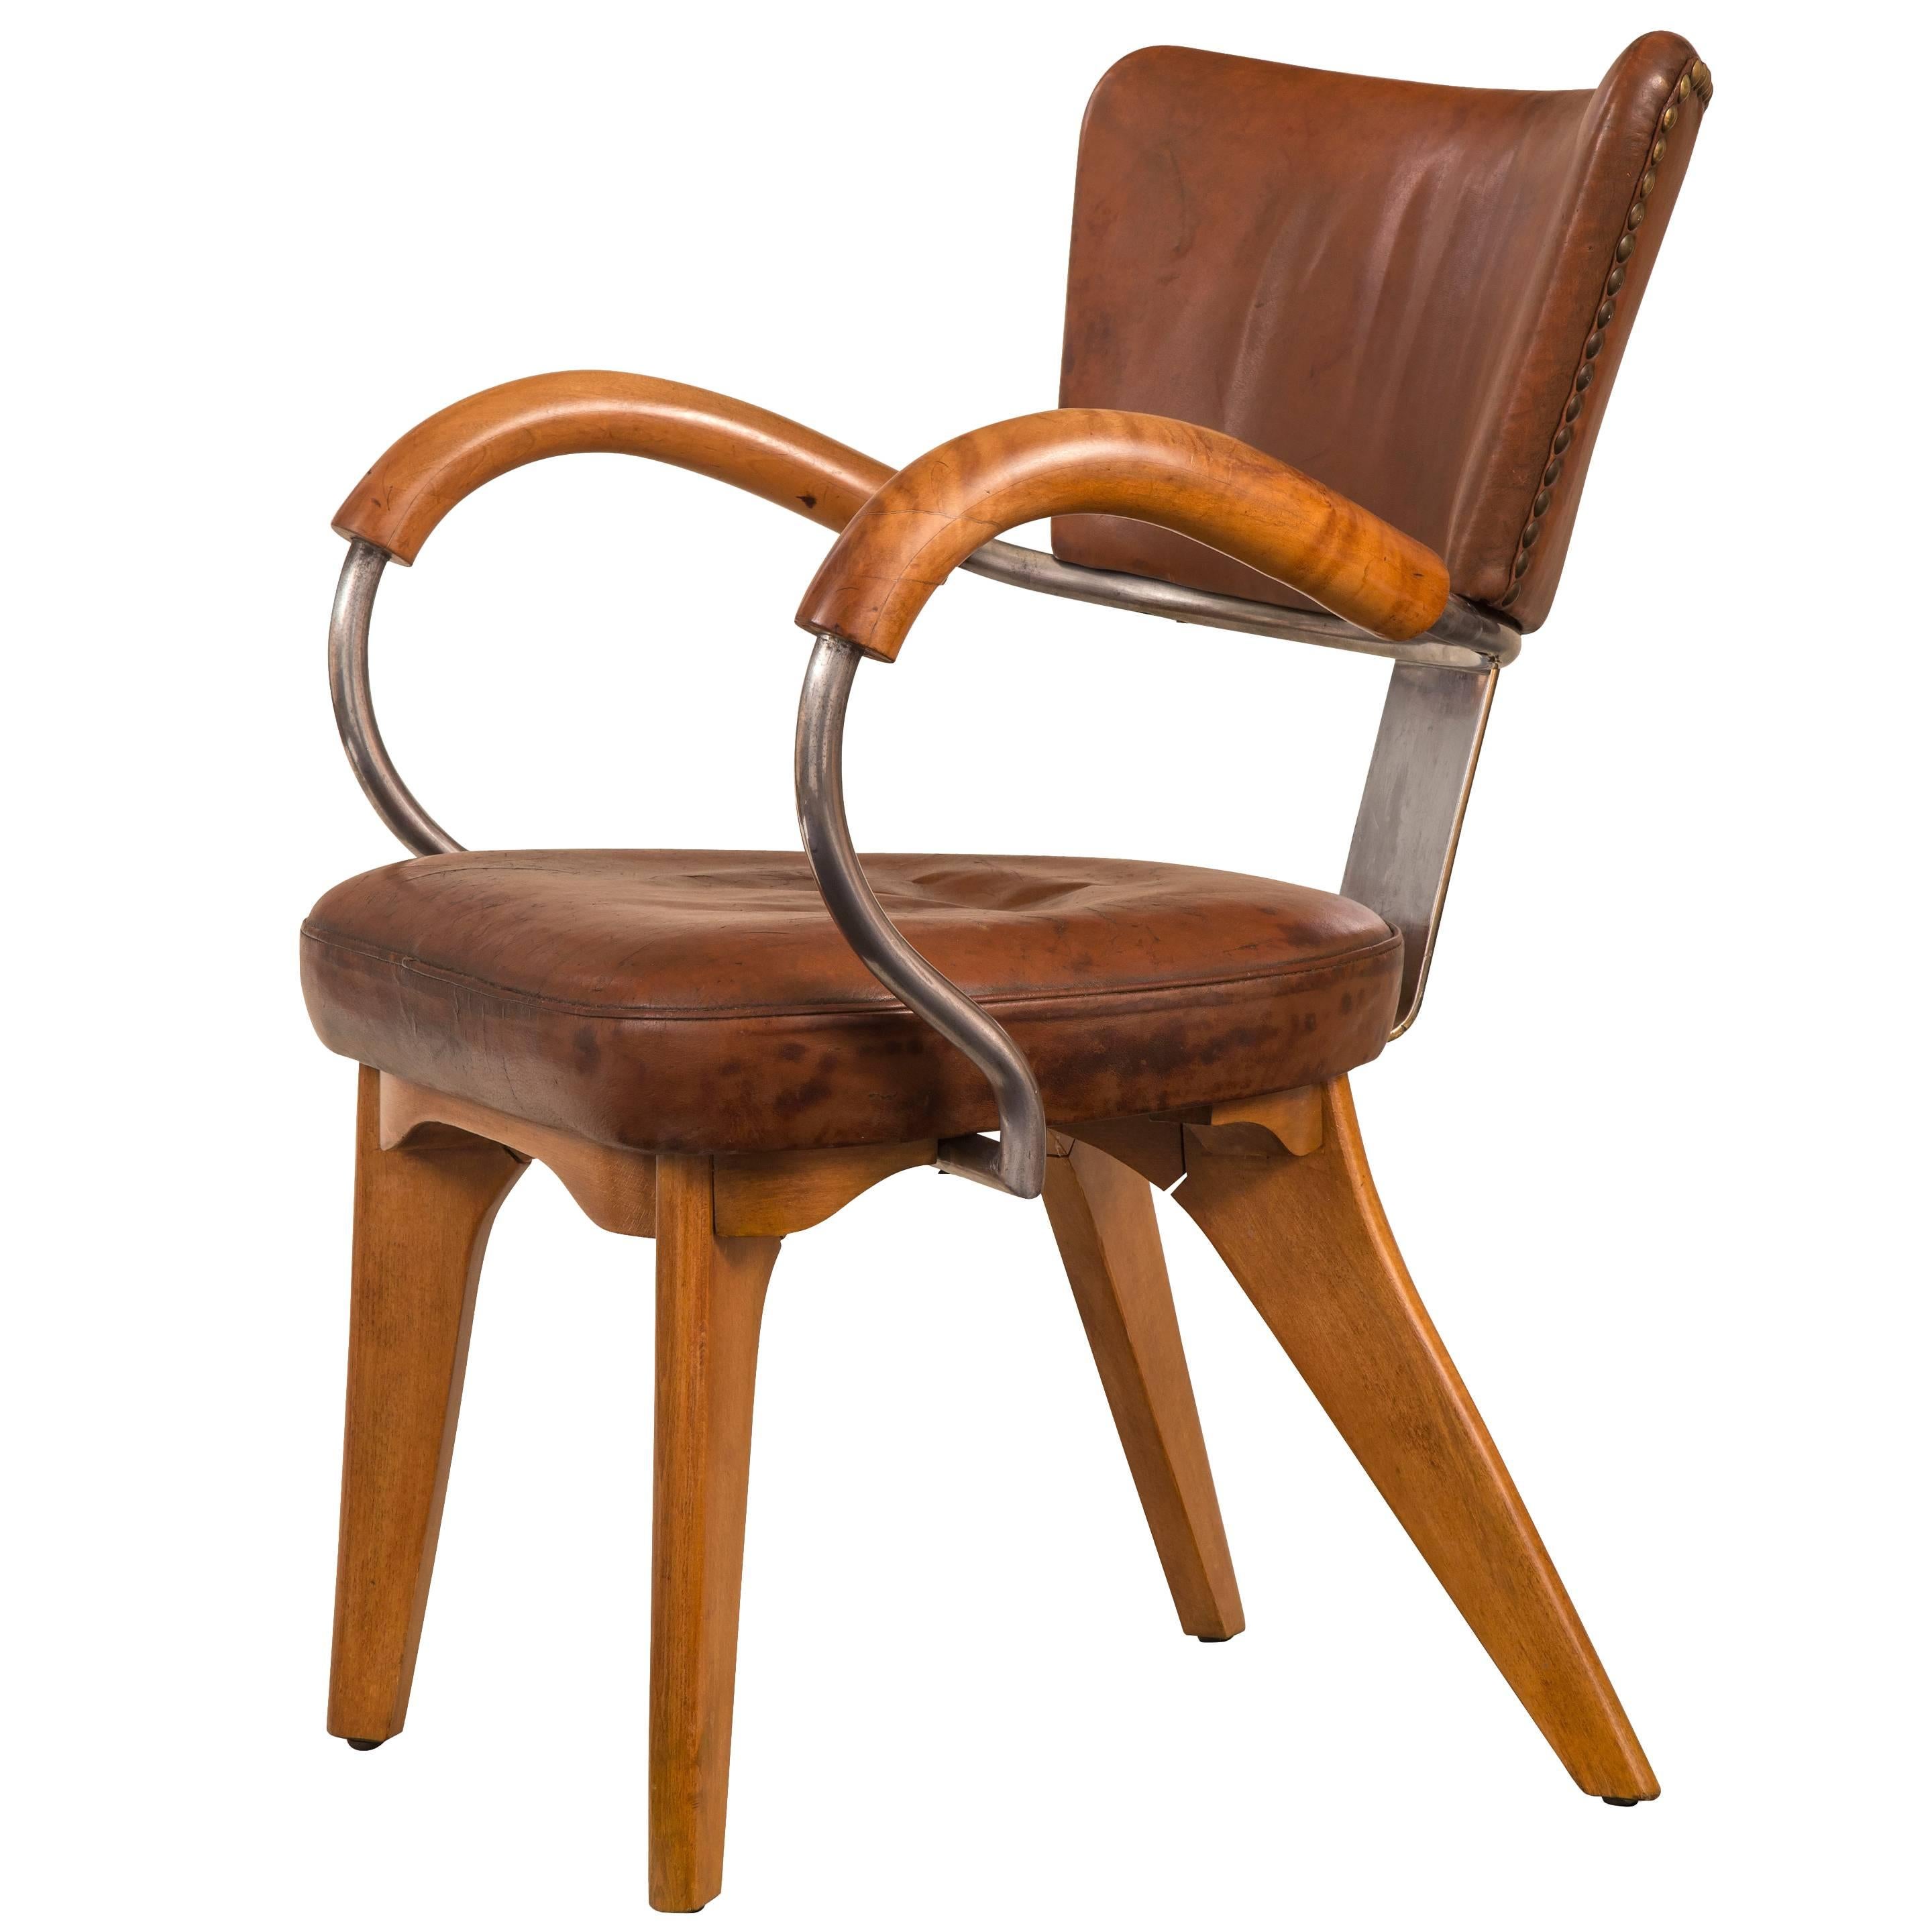 Flemming Lassen, Rare if not Unique Original Leather, Beech and Steel Armchair